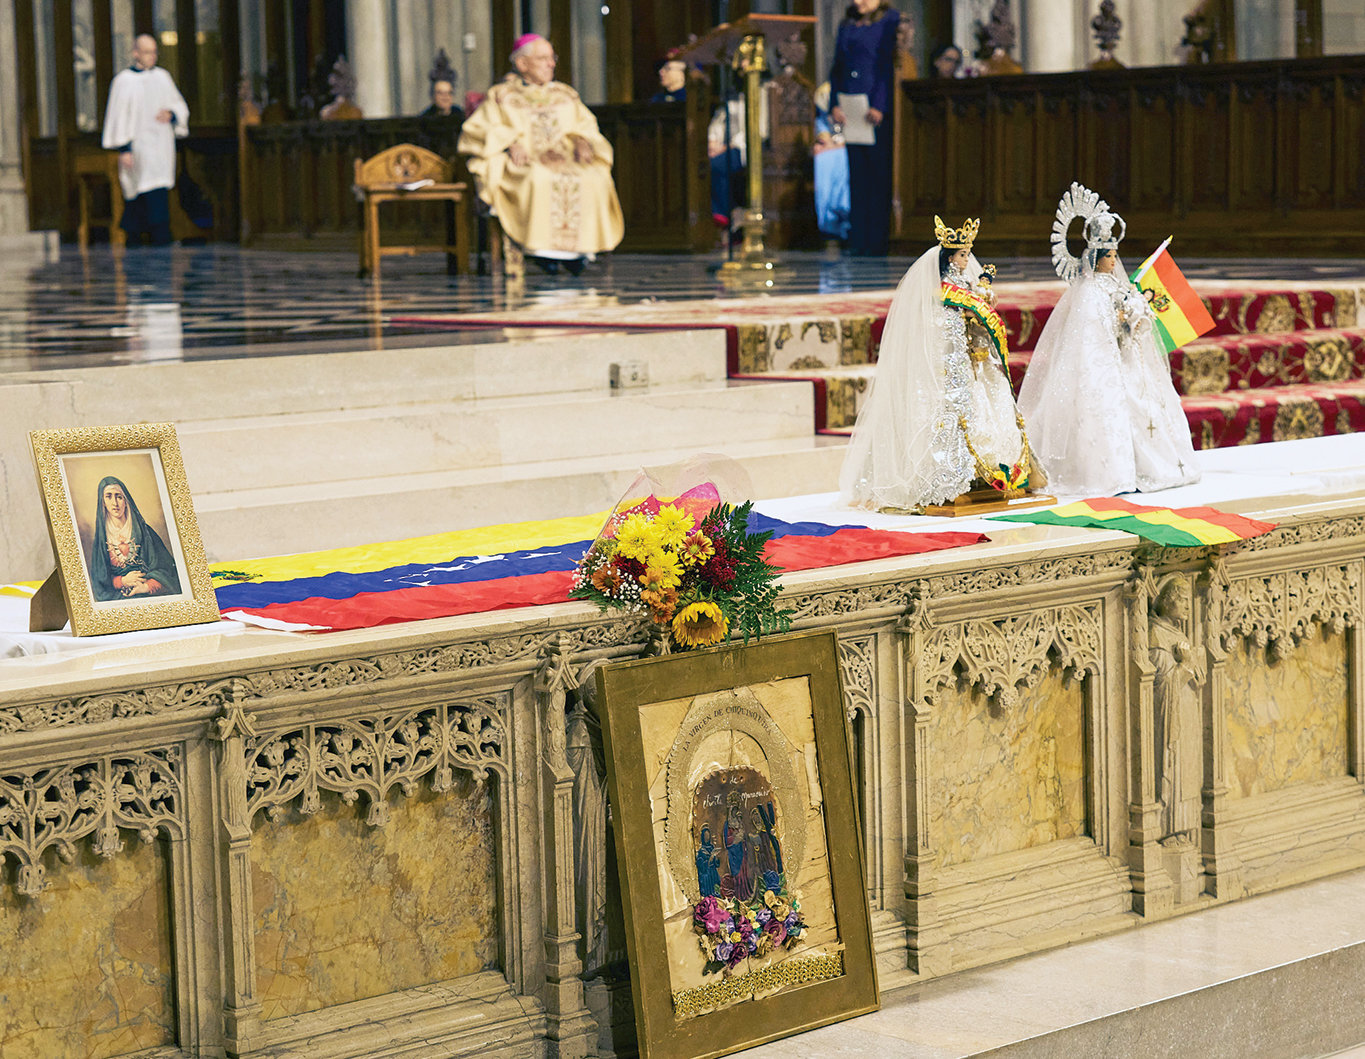 Representatives of Latin American countries and devotions to Our Lady are shown at the Spanish Mass.